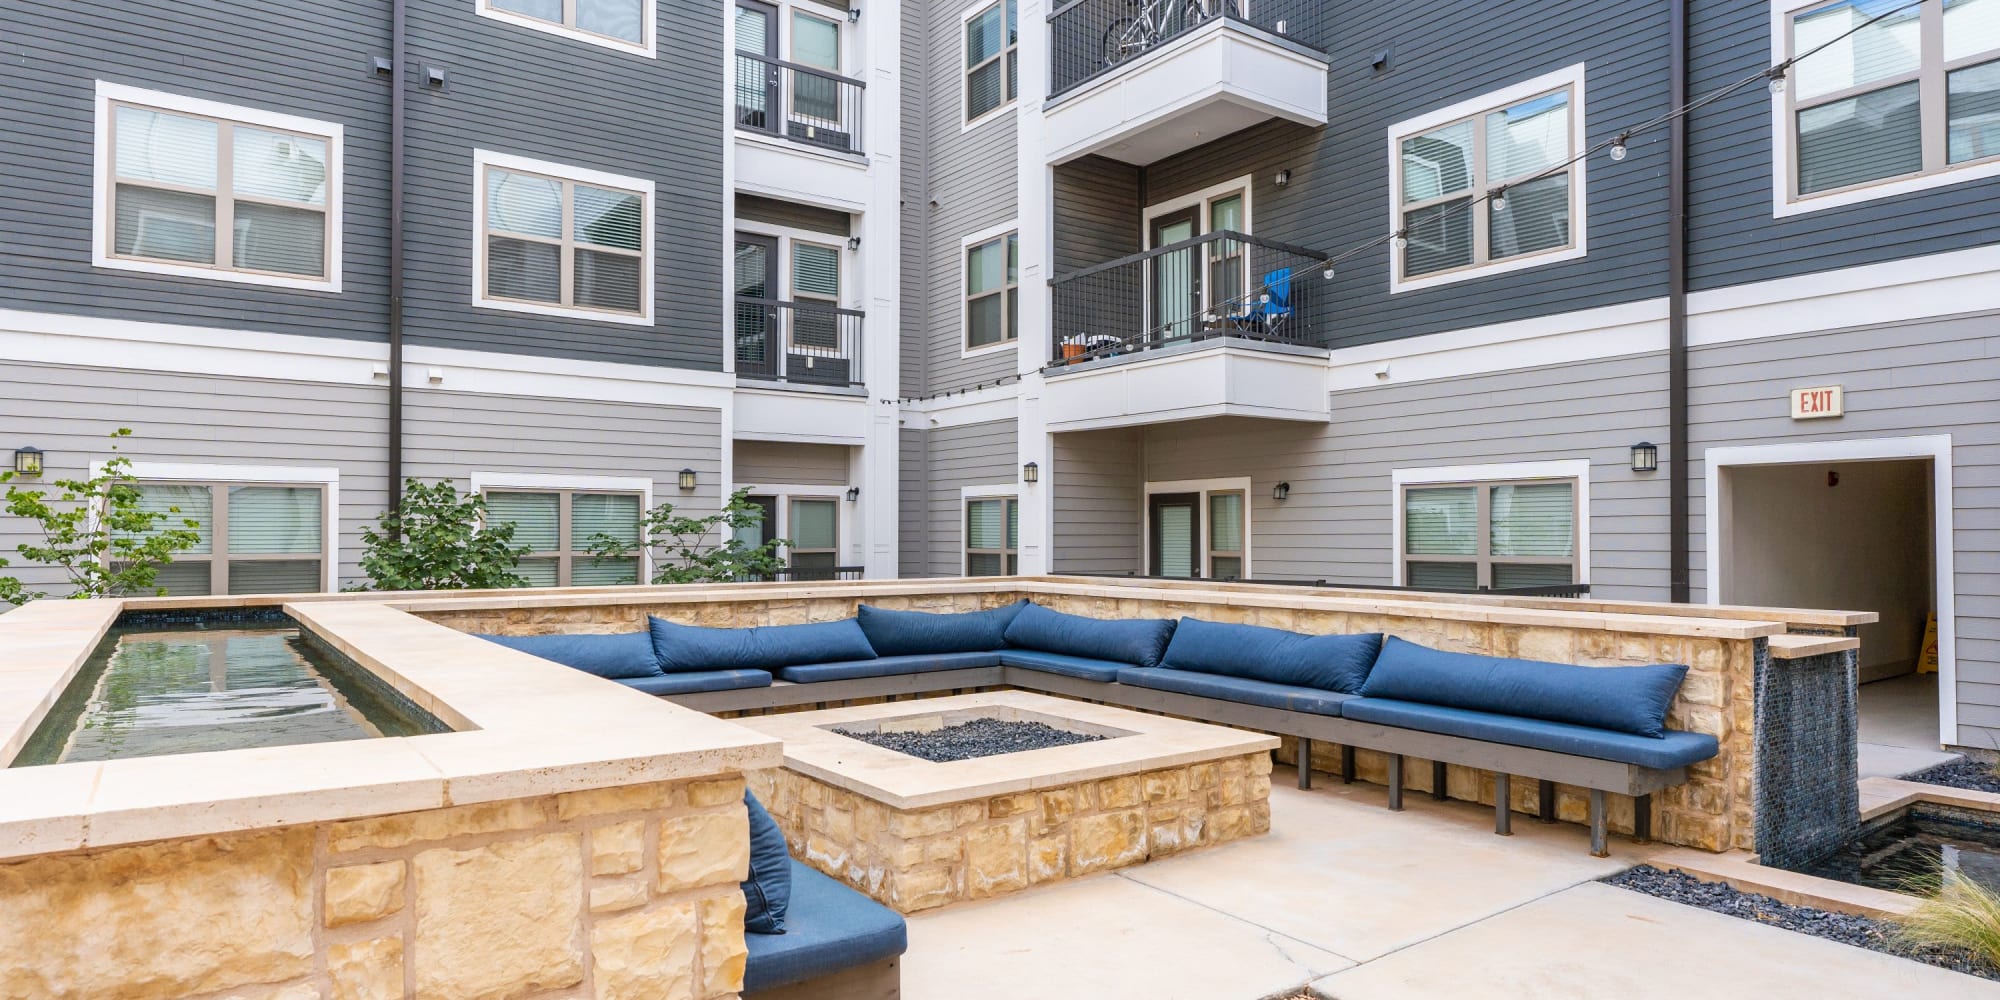 Outdoor firepit at The Everett at Ally Village in Midland, Texas